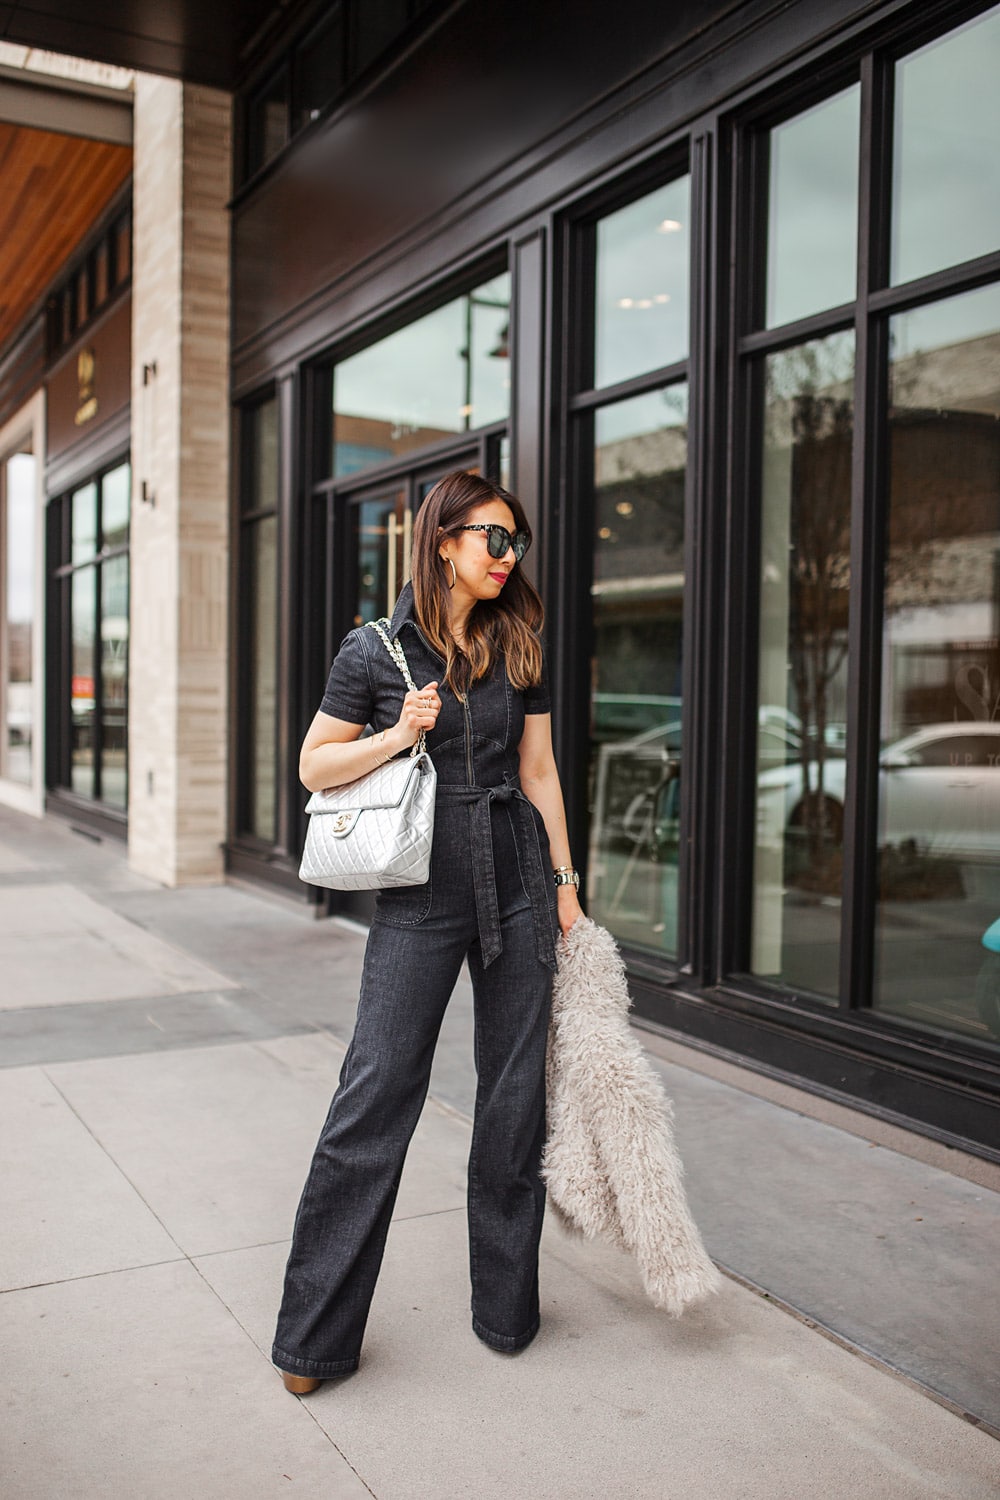 How to Style a Jumpsuit for Work - Olivia Jeanette  Jumpsuit outfit  casual, Summer work outfits, Black jumpsuit outfit